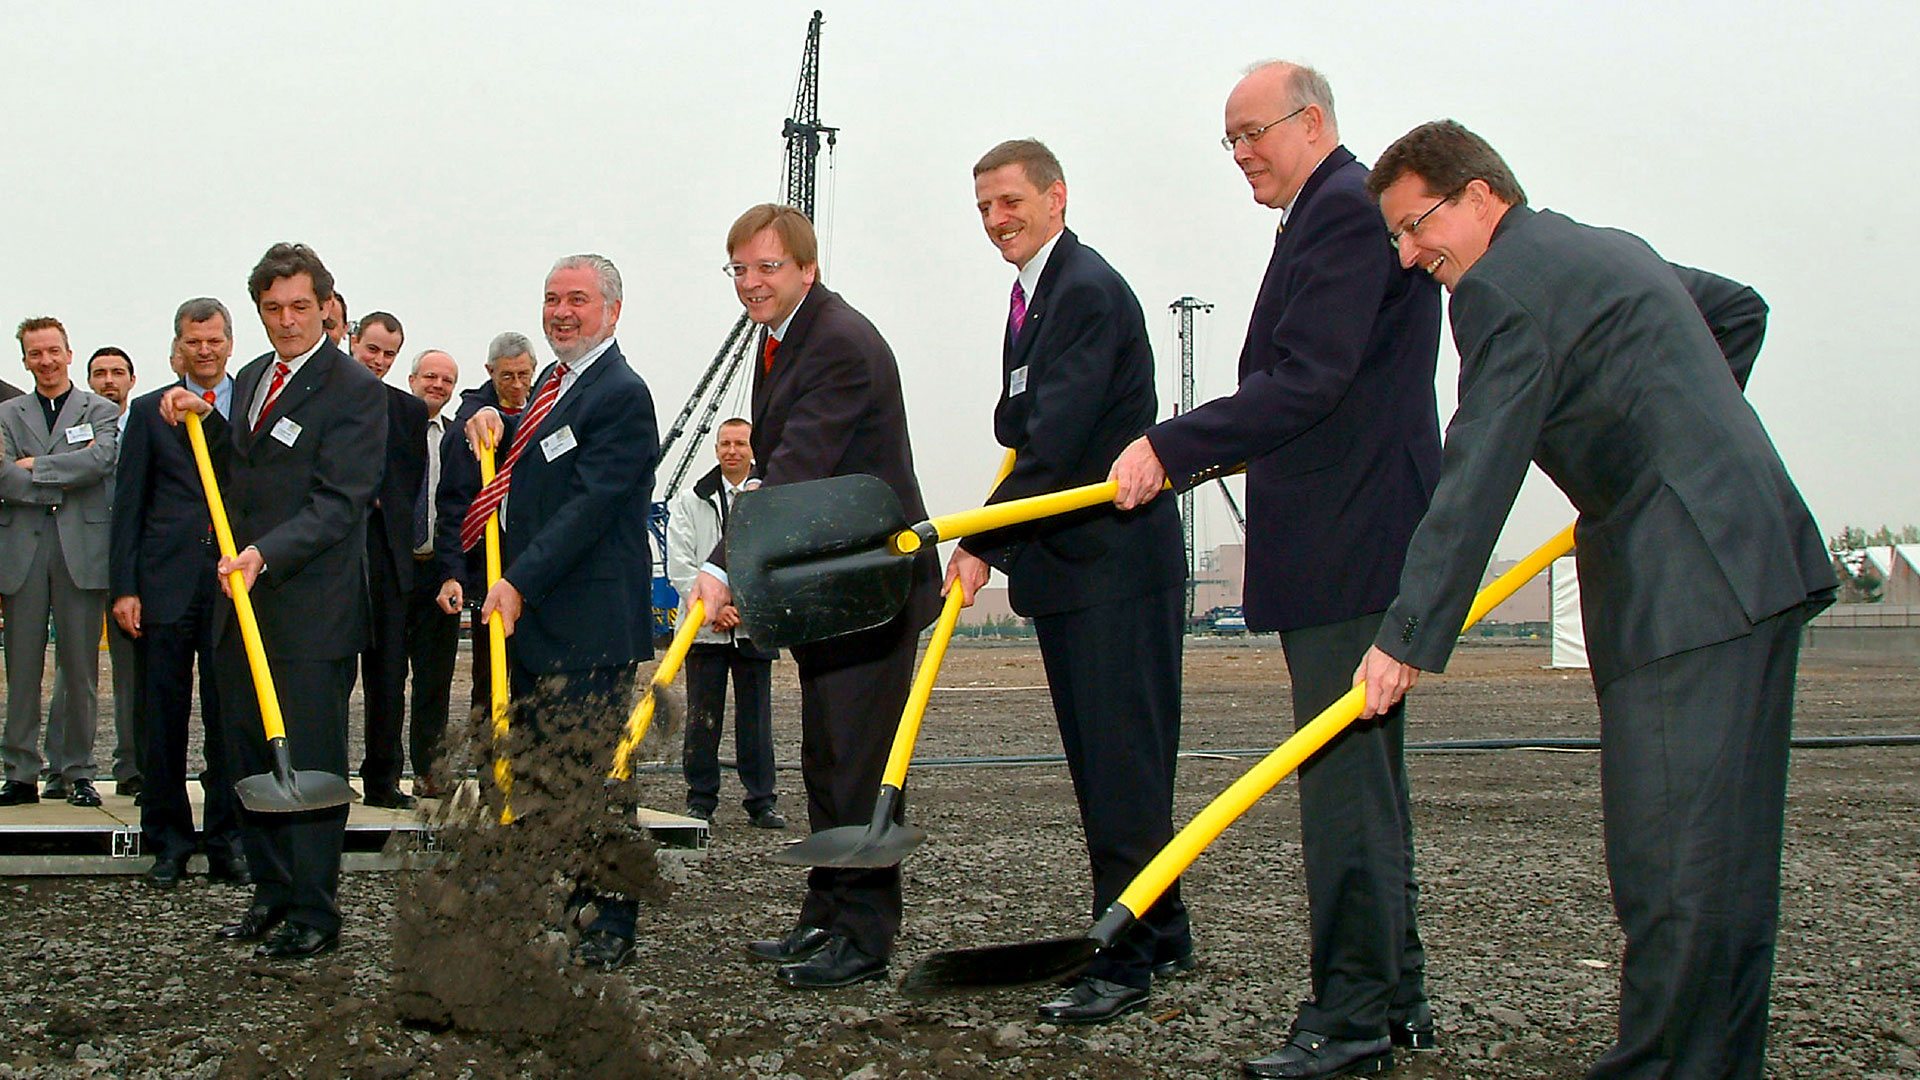 An empty lot with 6 people in suits holding yellow shovels